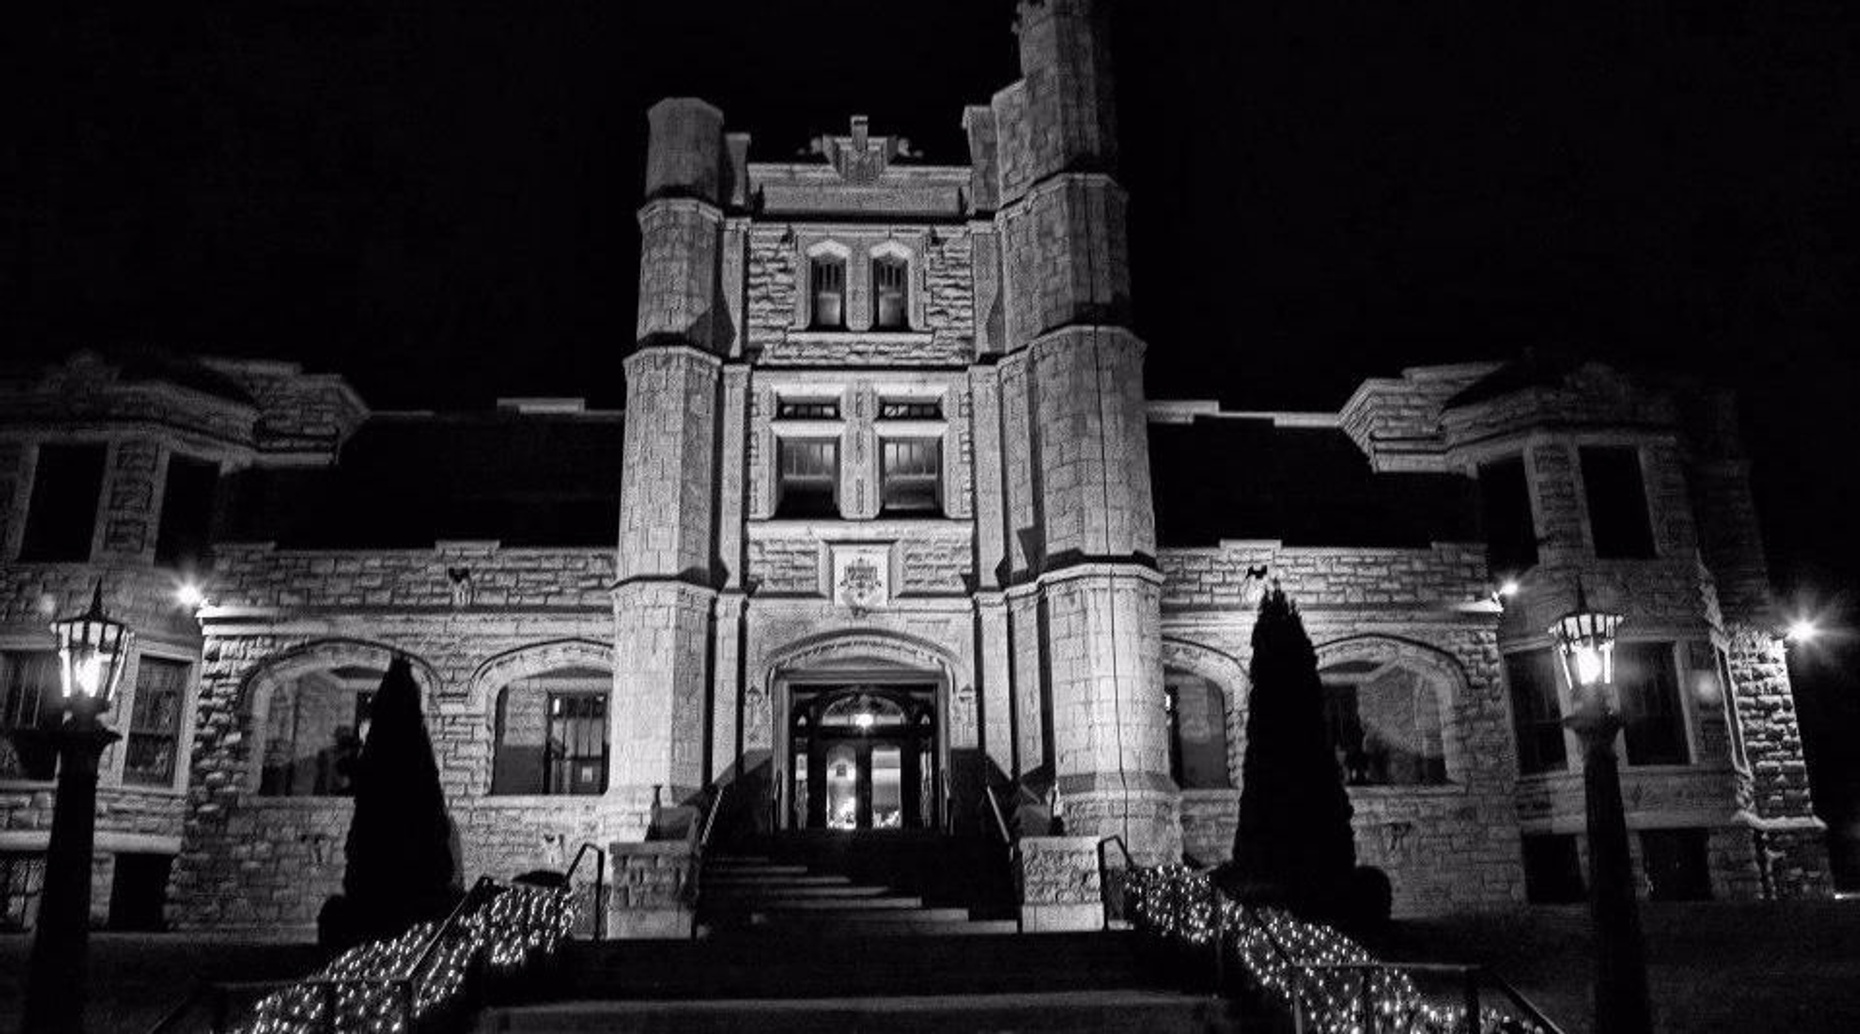 Ghost Tour at Pythian Castle in Springfield, MO